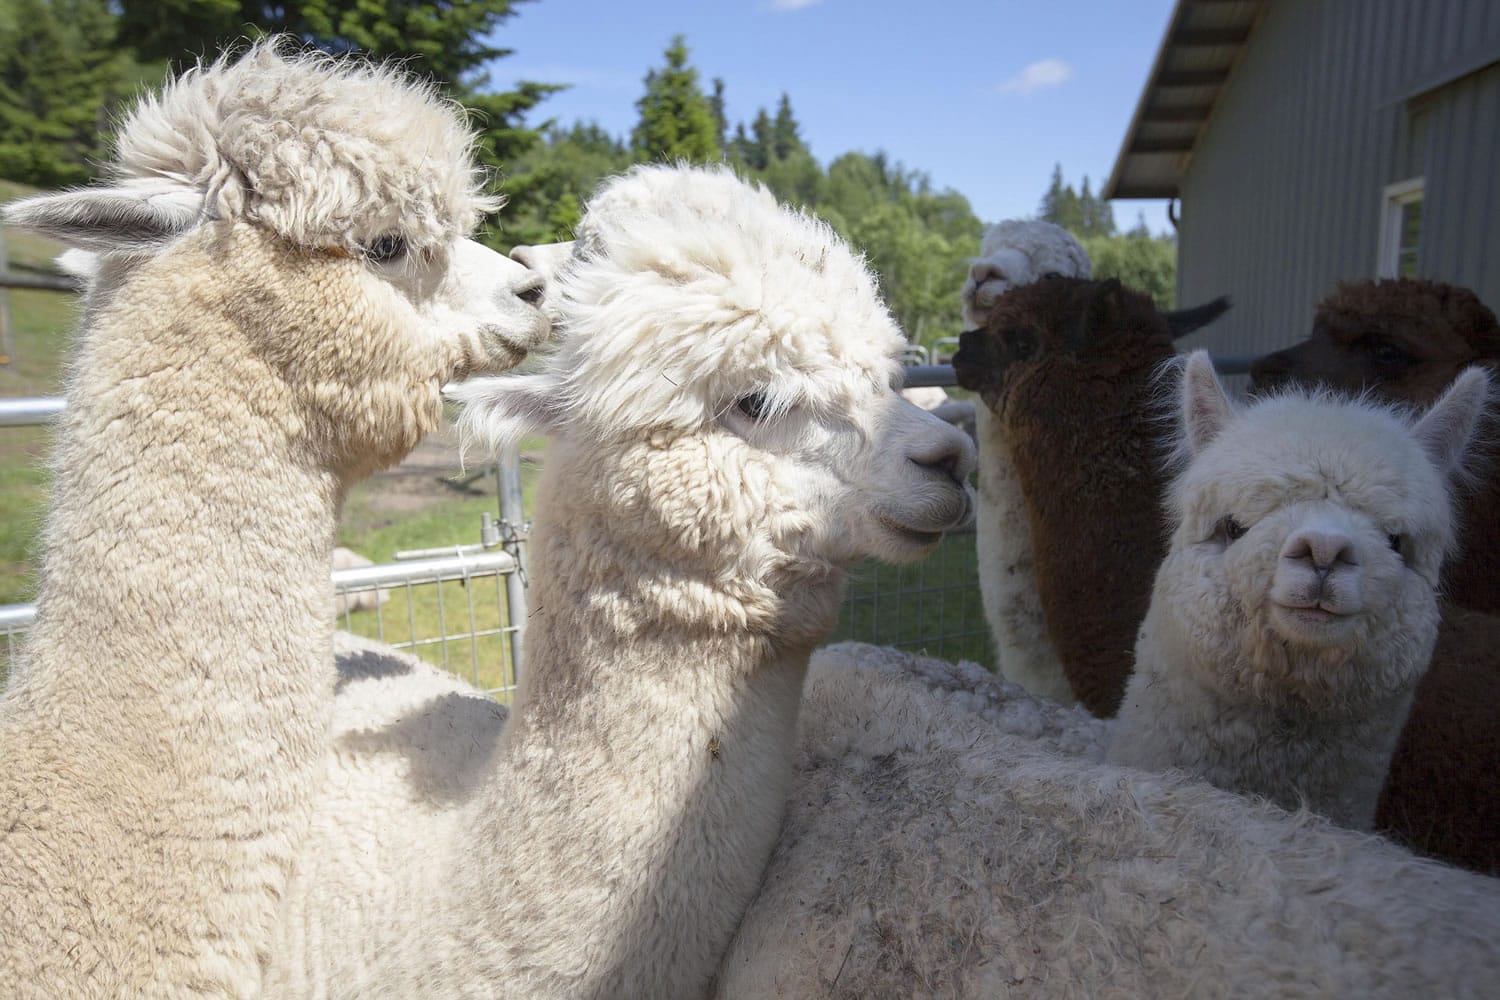 Alpacas from Majestic View Alpaca farm in Woodland wait their turn to have their fleece sheared at Columbia Mist Alpaca farm on Sunday June 1st 2014.